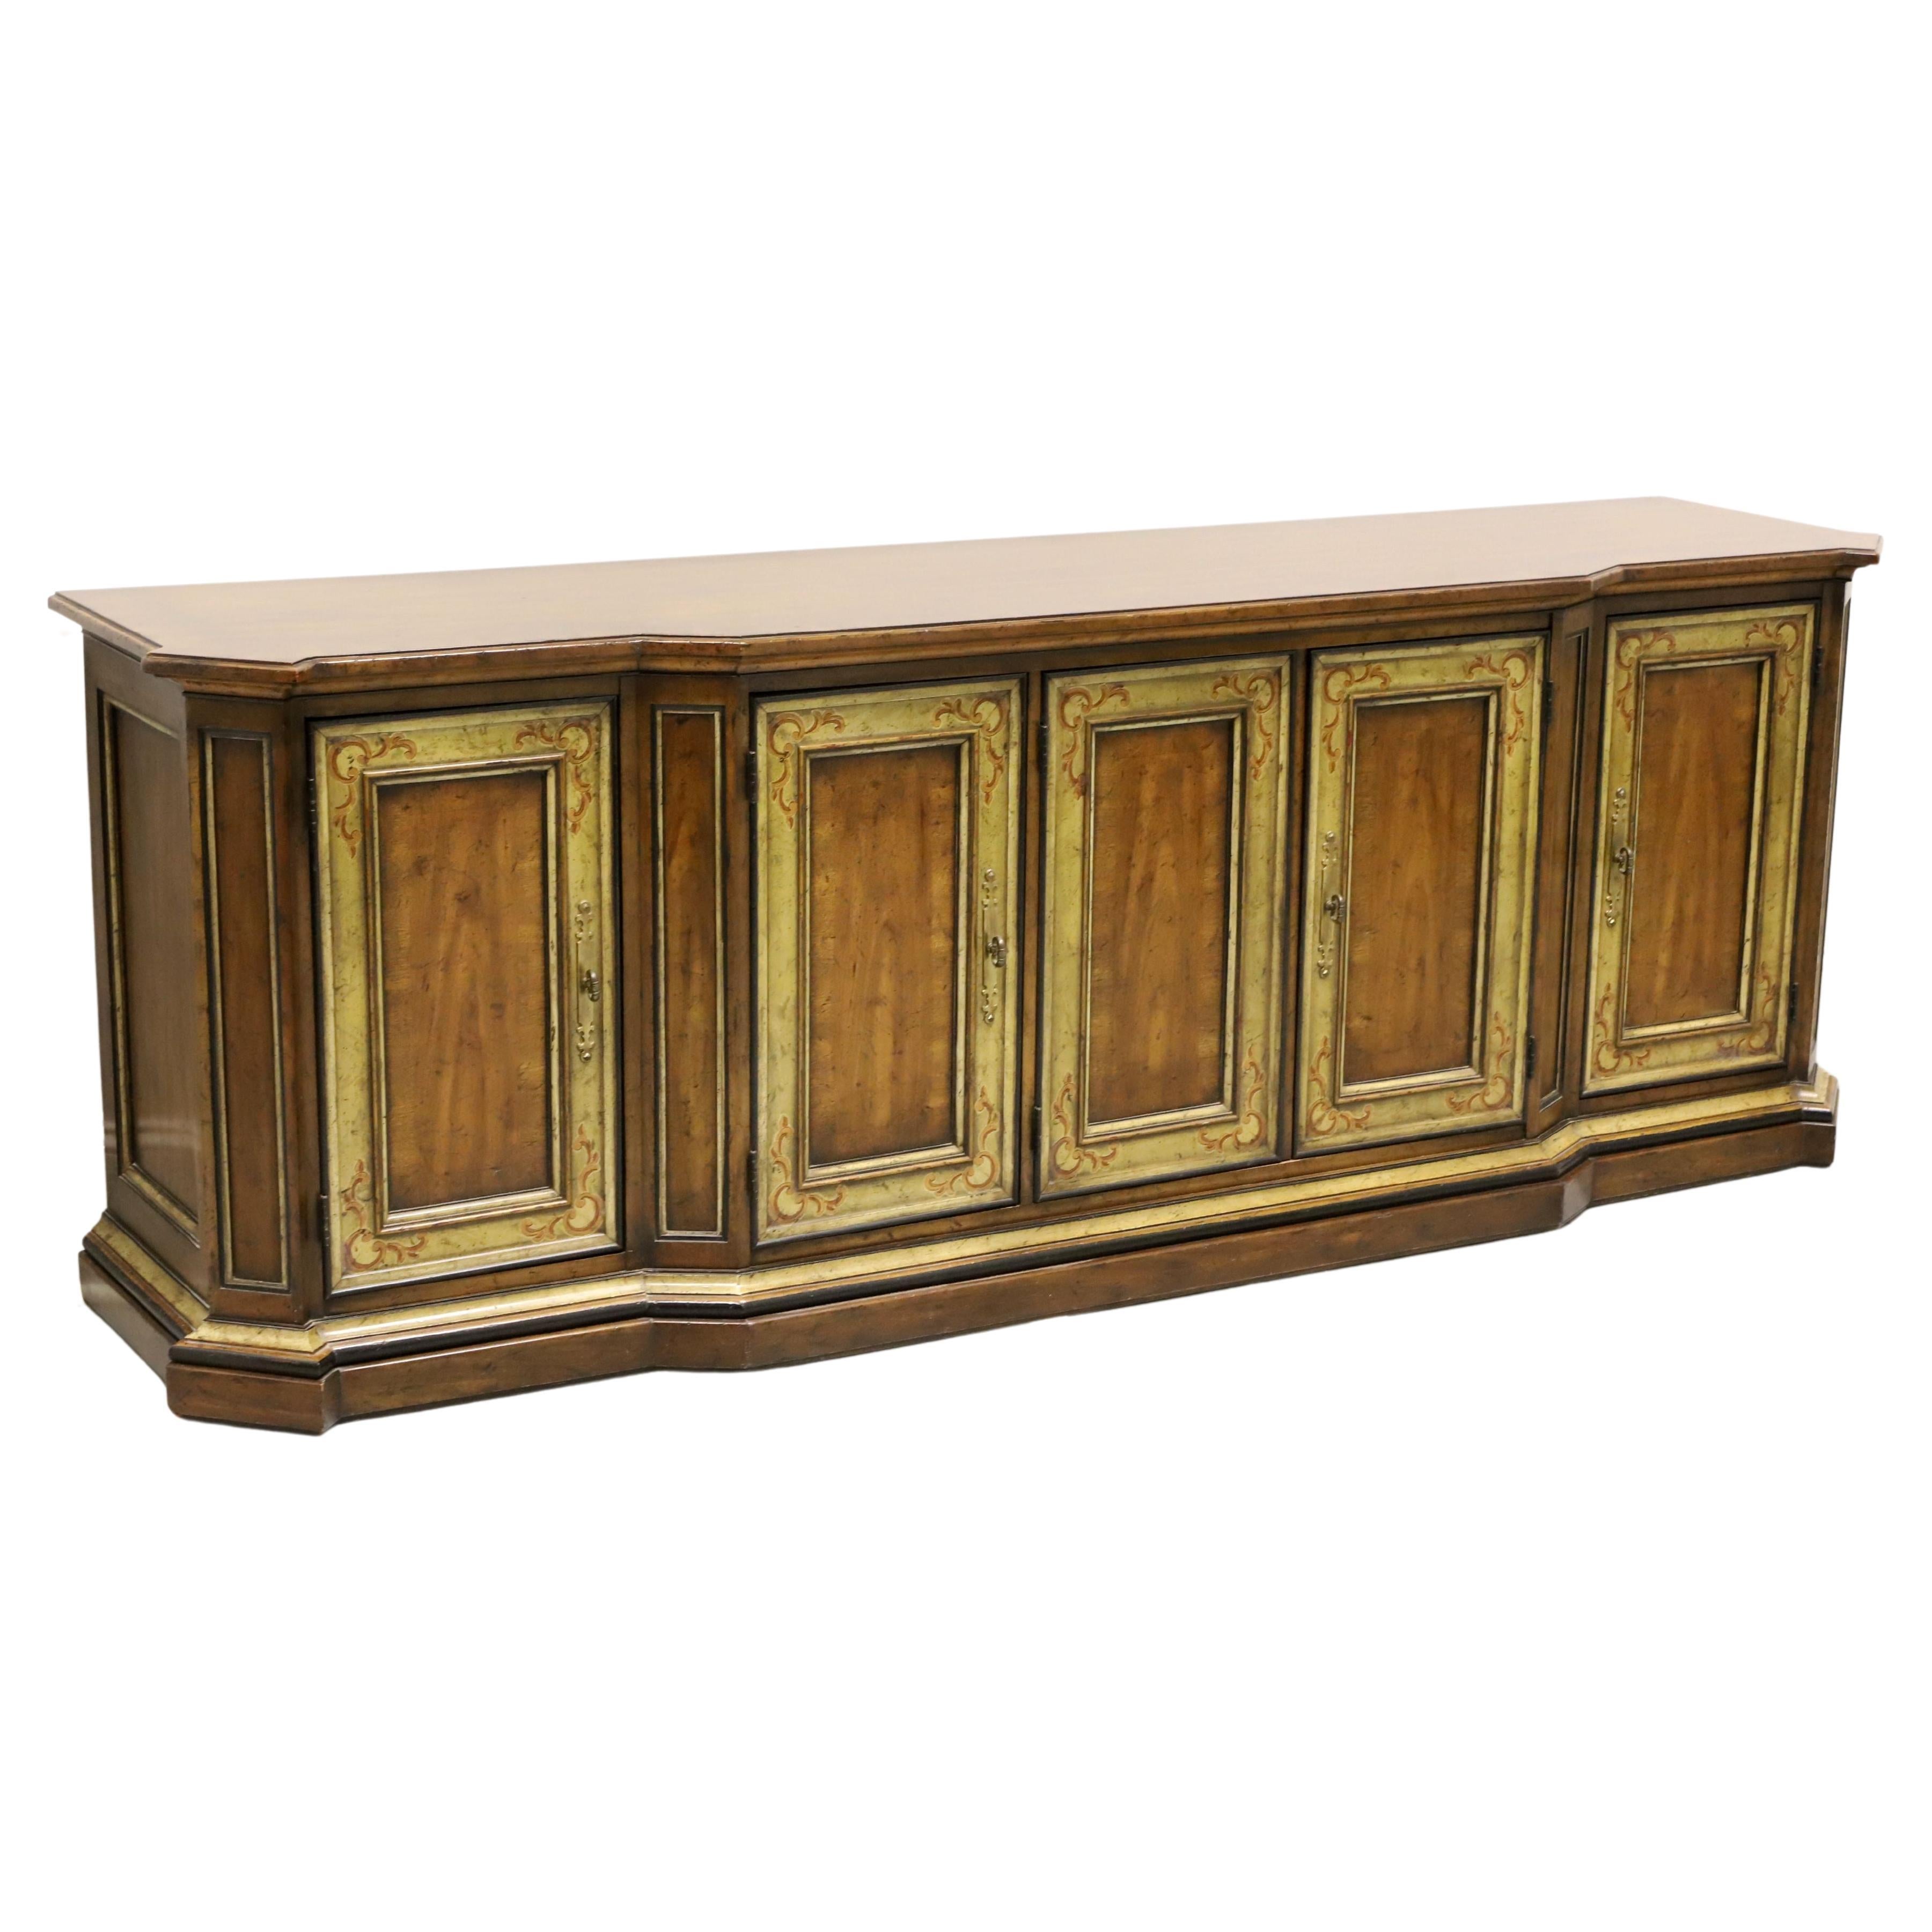 DREXEL HERITAGE Sketchbook Collection Mahogany French Country Buffet Credenza